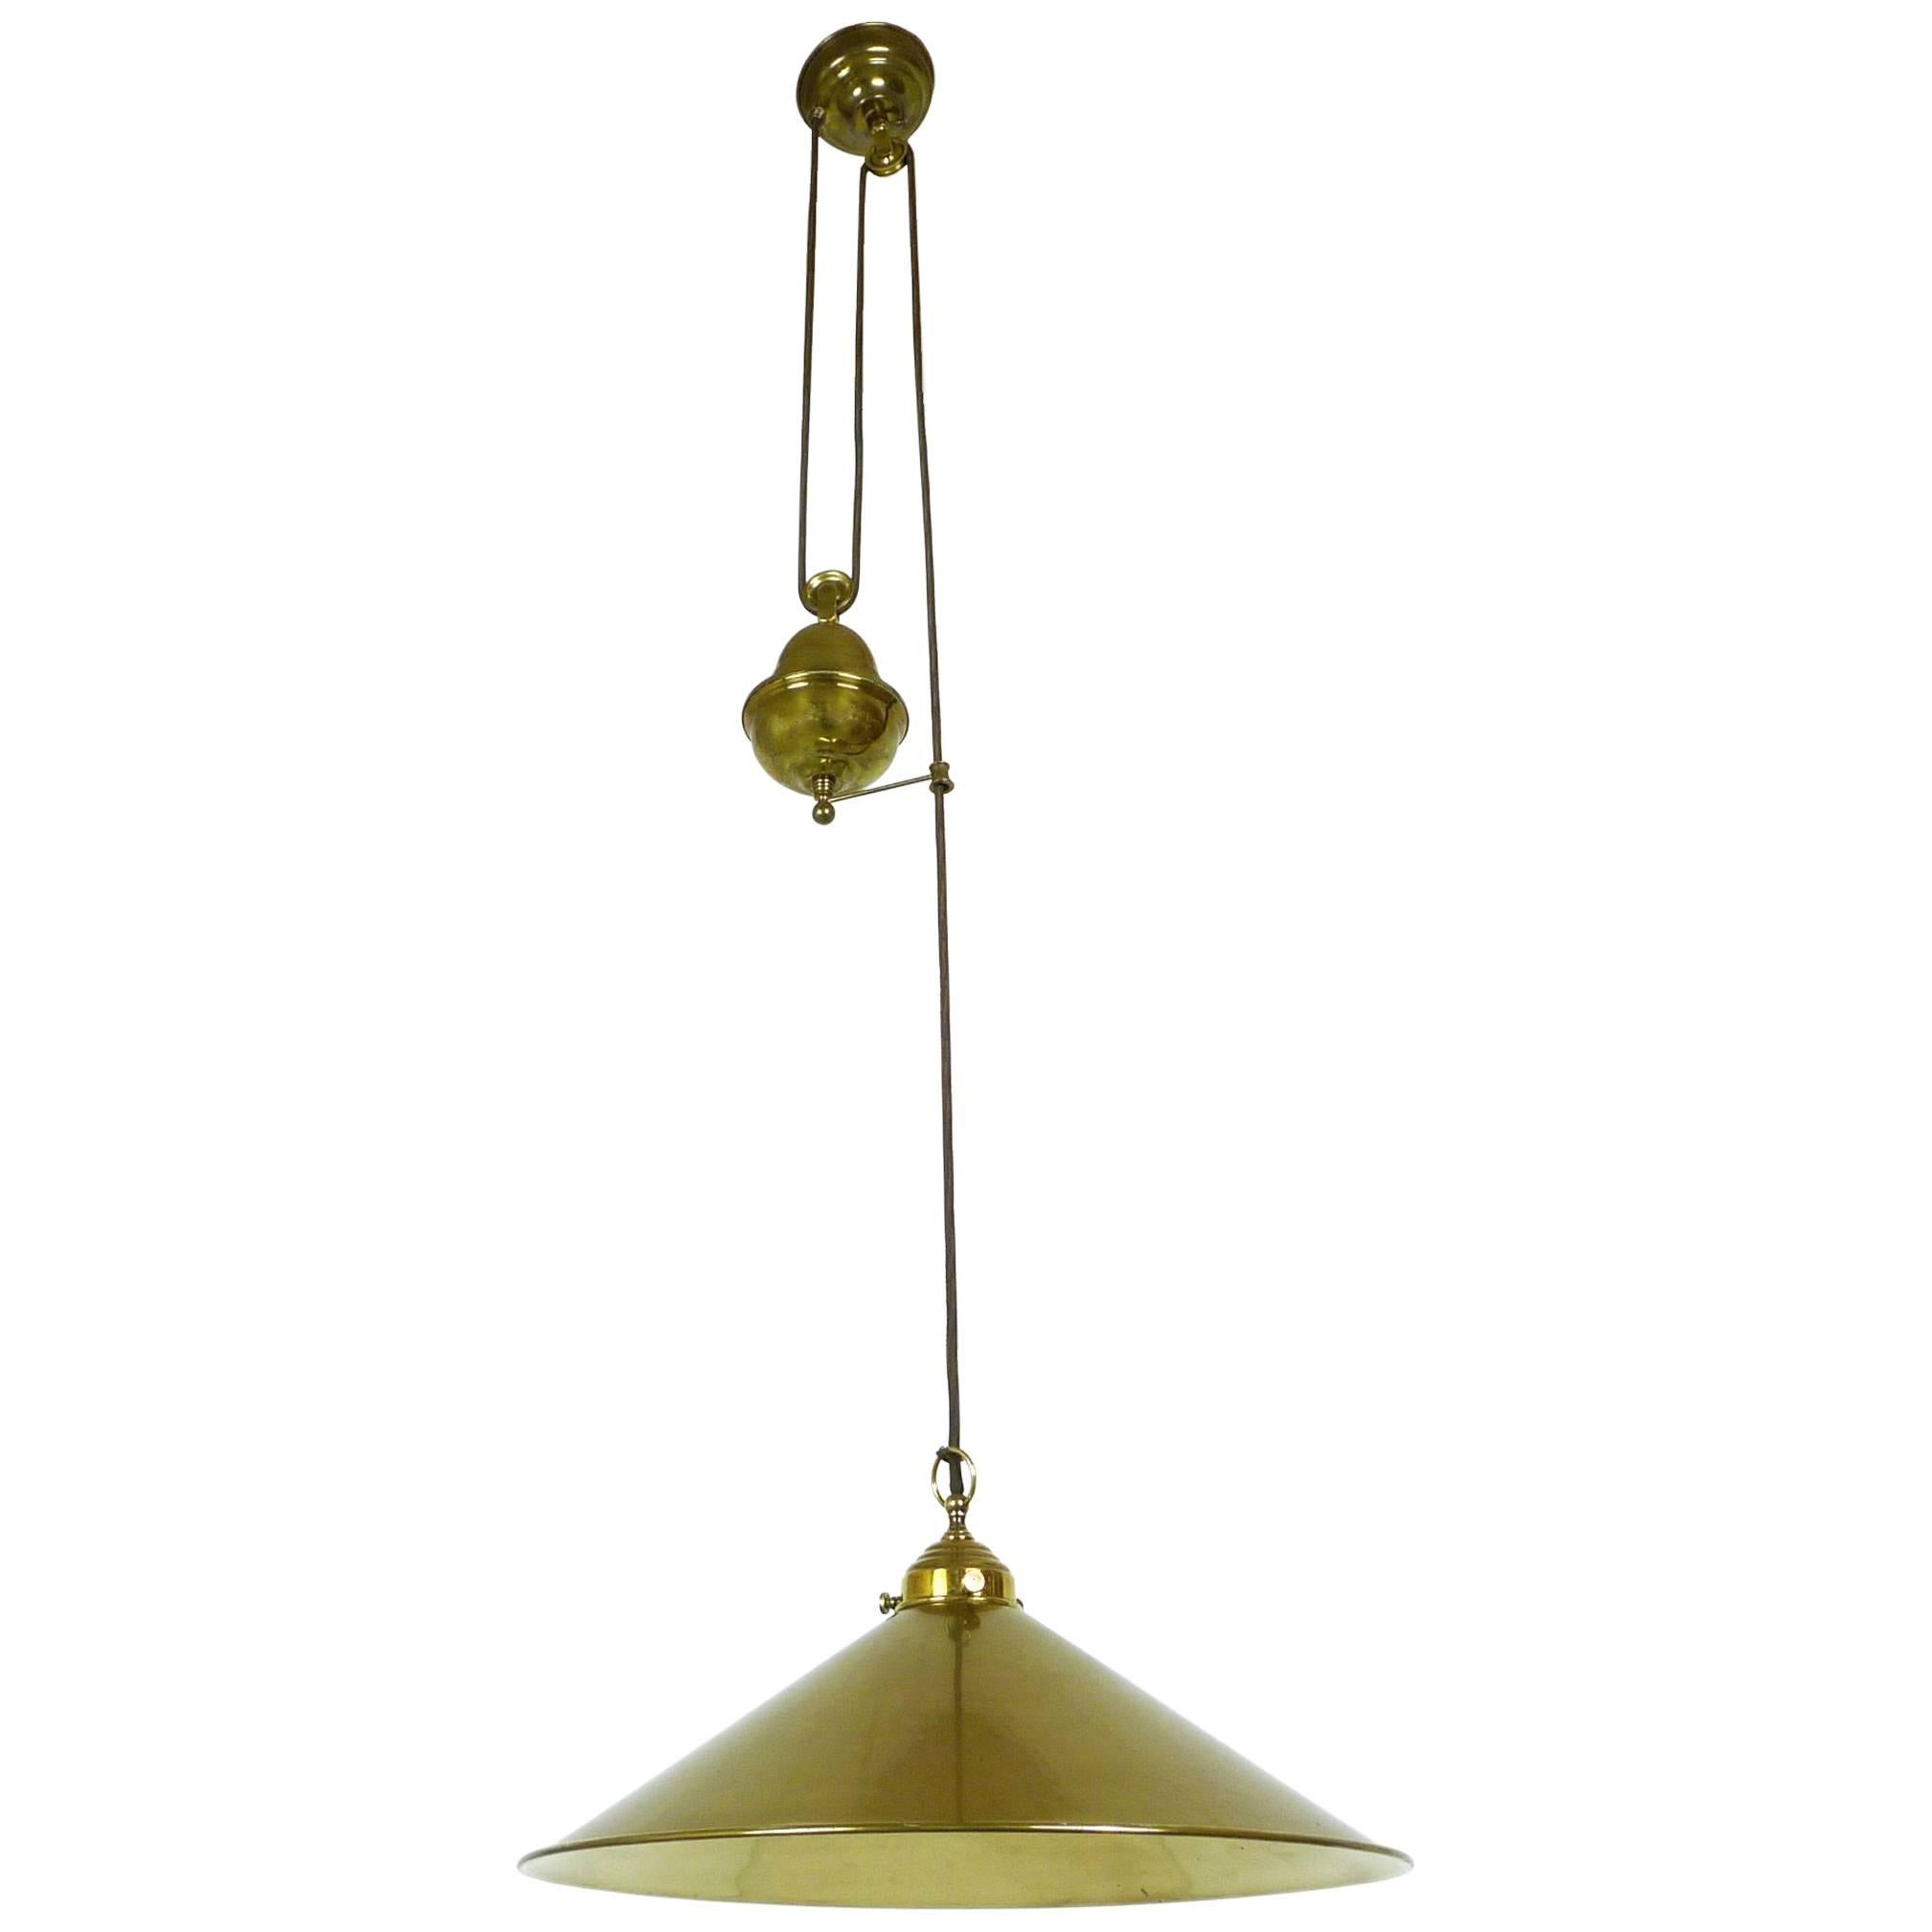 German Brass Pulley Pendant from the 1950s